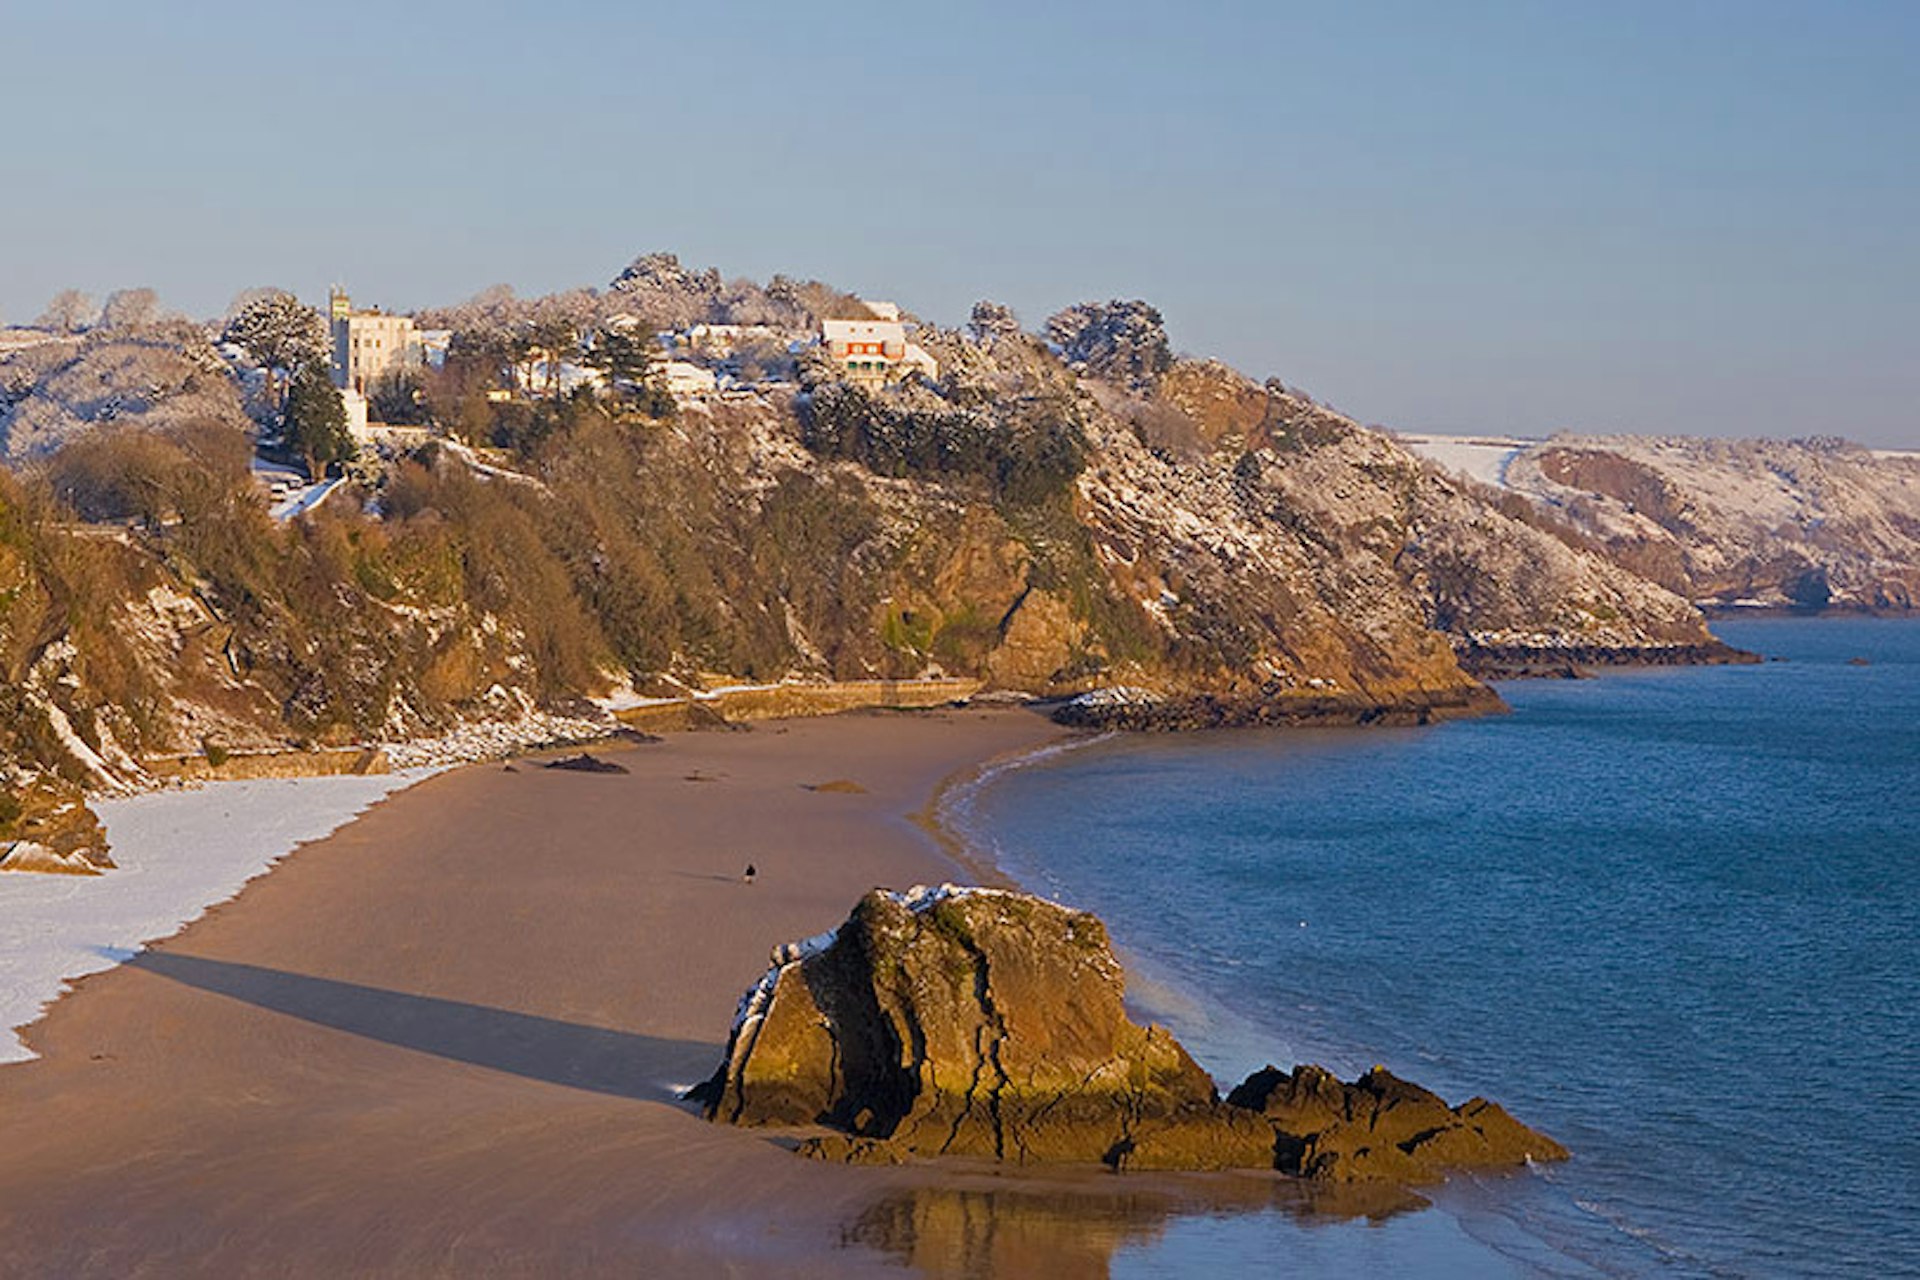 Tenby, Pembrokeshire. Image by David Evans / CC BY 2.0